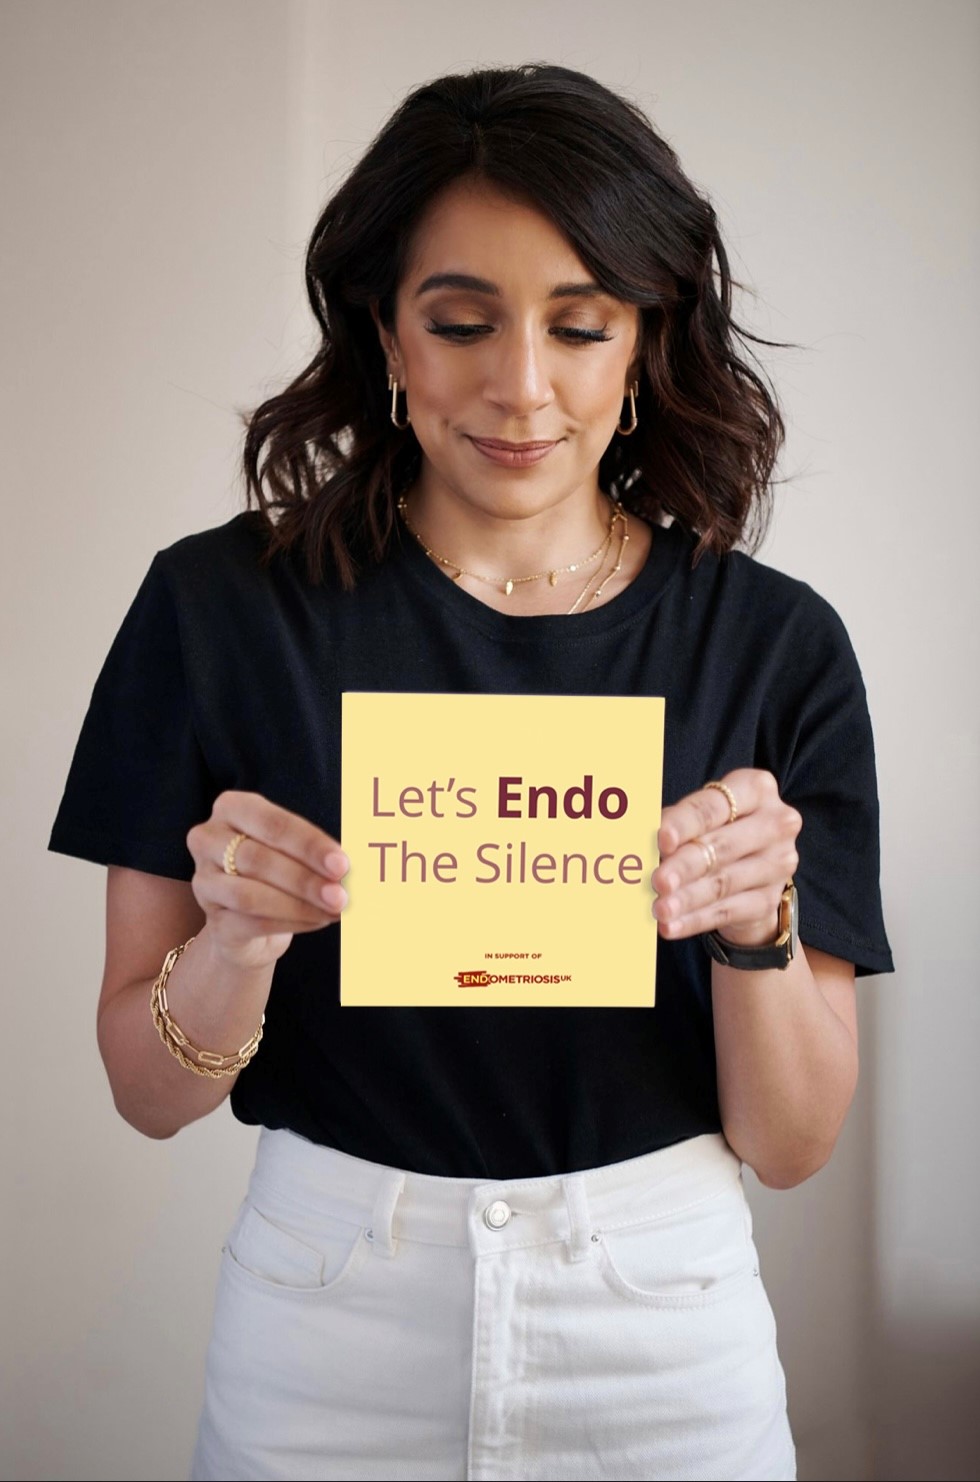 Aneka with a sign saying "Lets Endo the Silence"